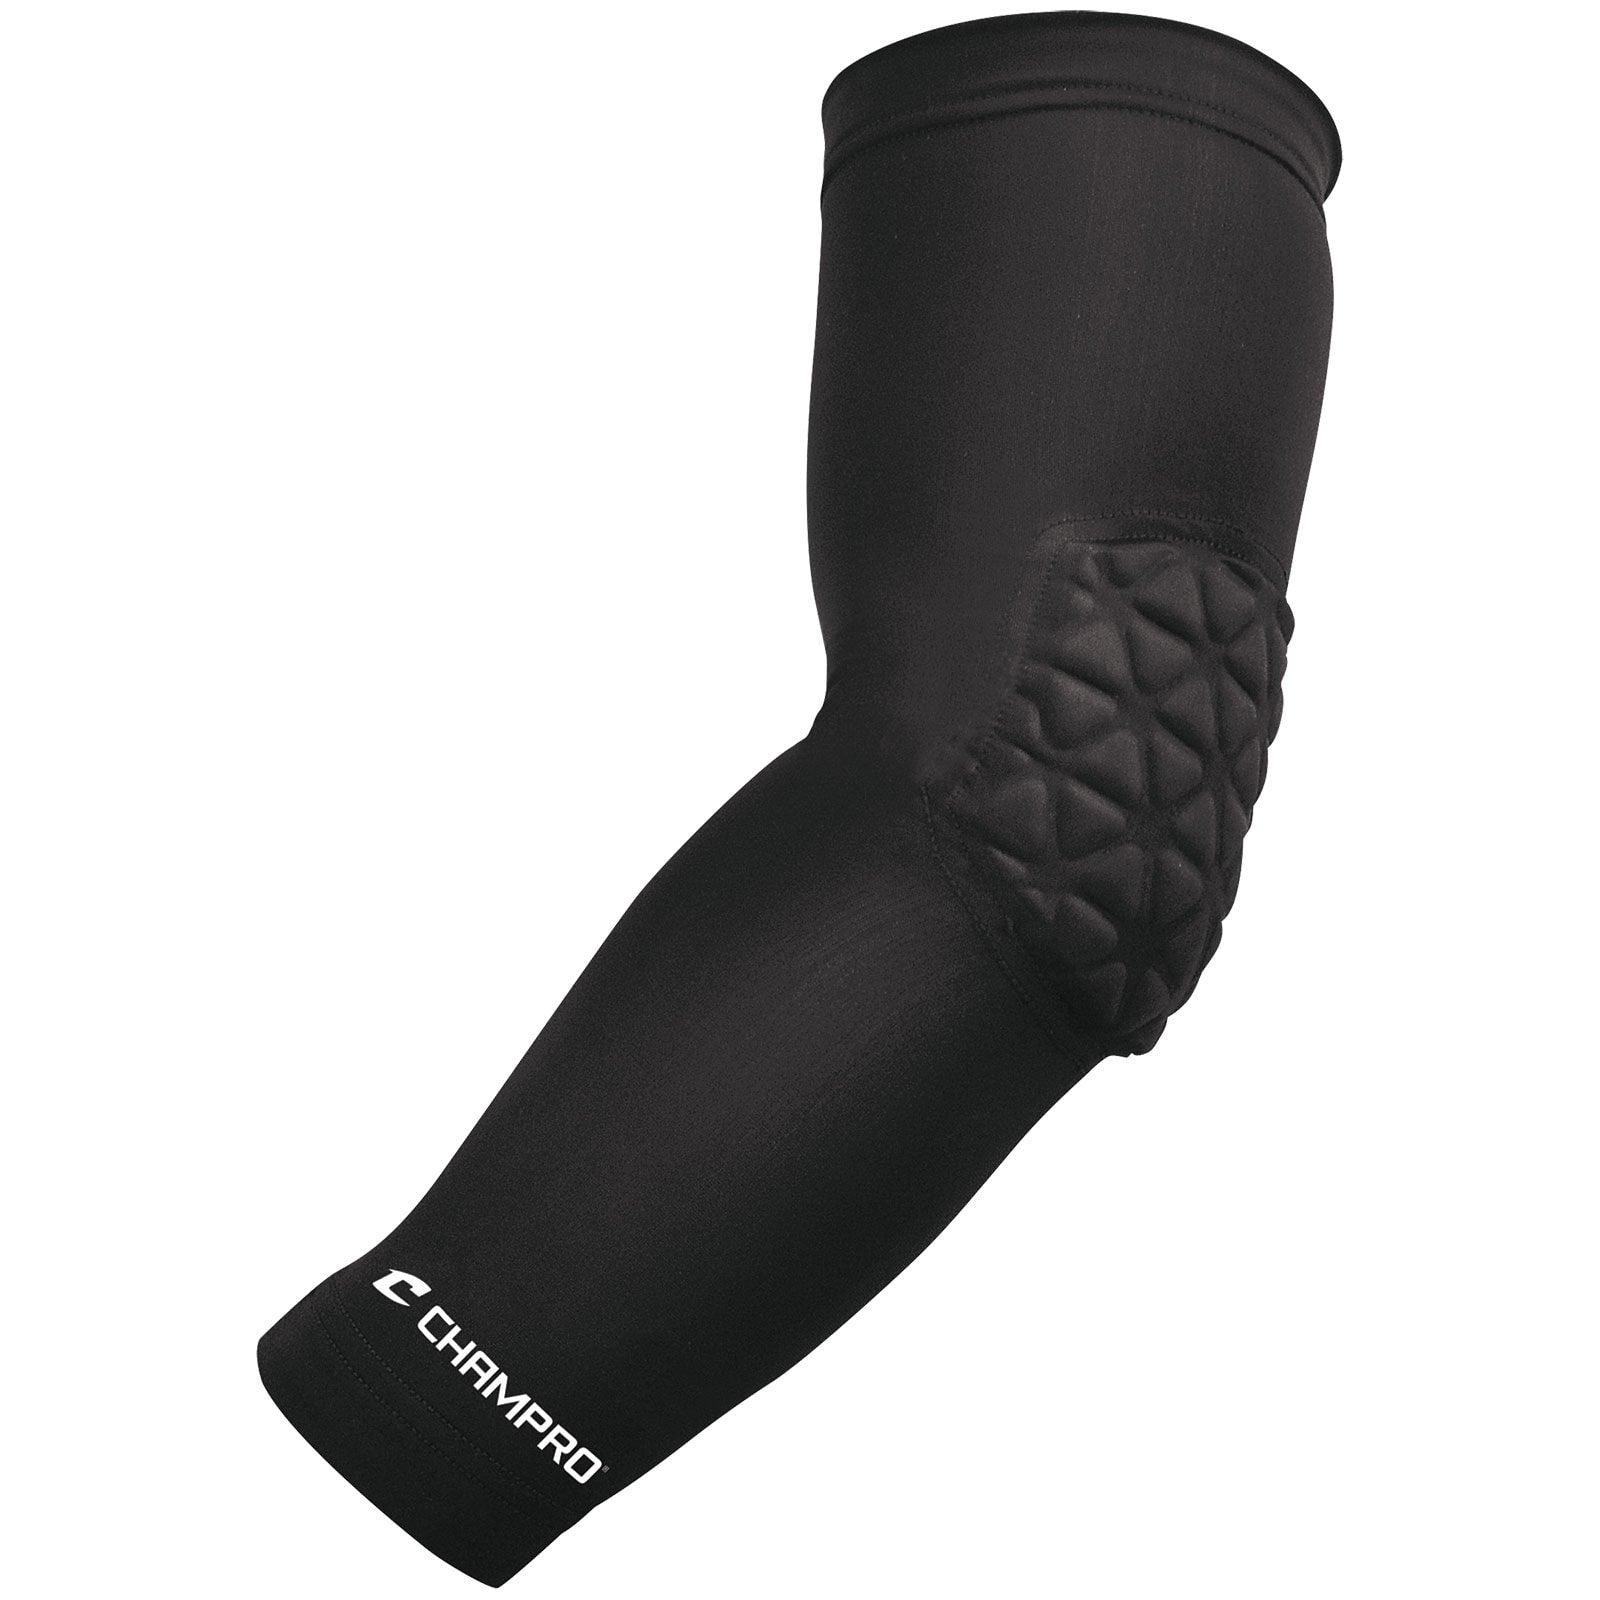 Champro Formation Adult Protective Compression Girdle